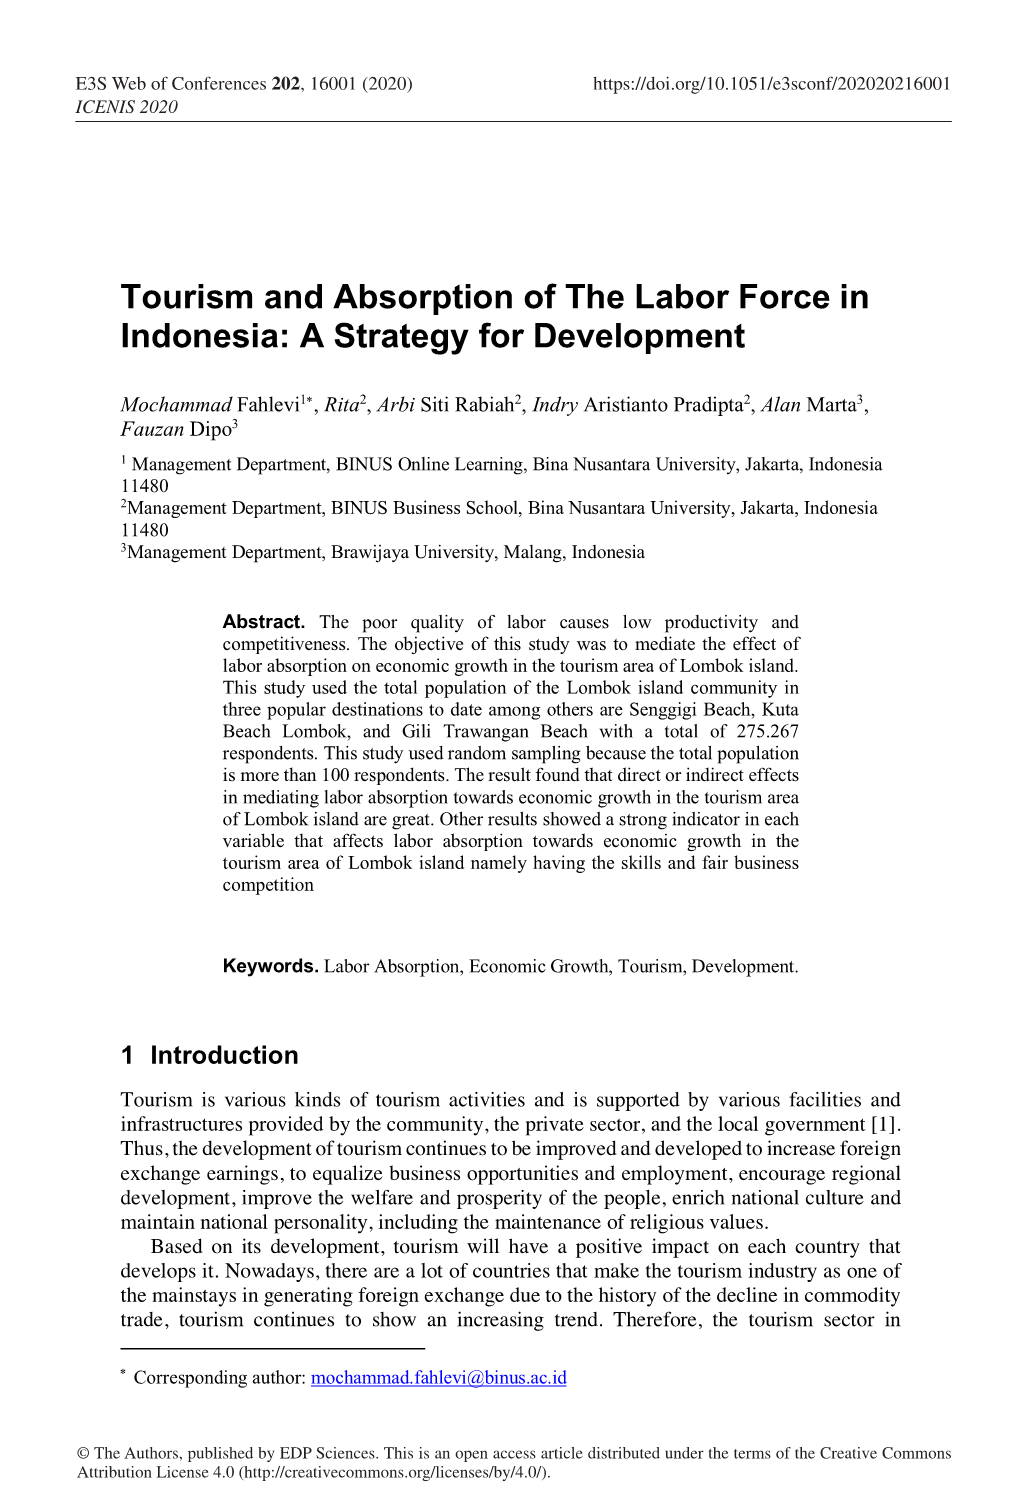 Tourism and Absorption of the Labor Force in Indonesia: a Strategy for Development